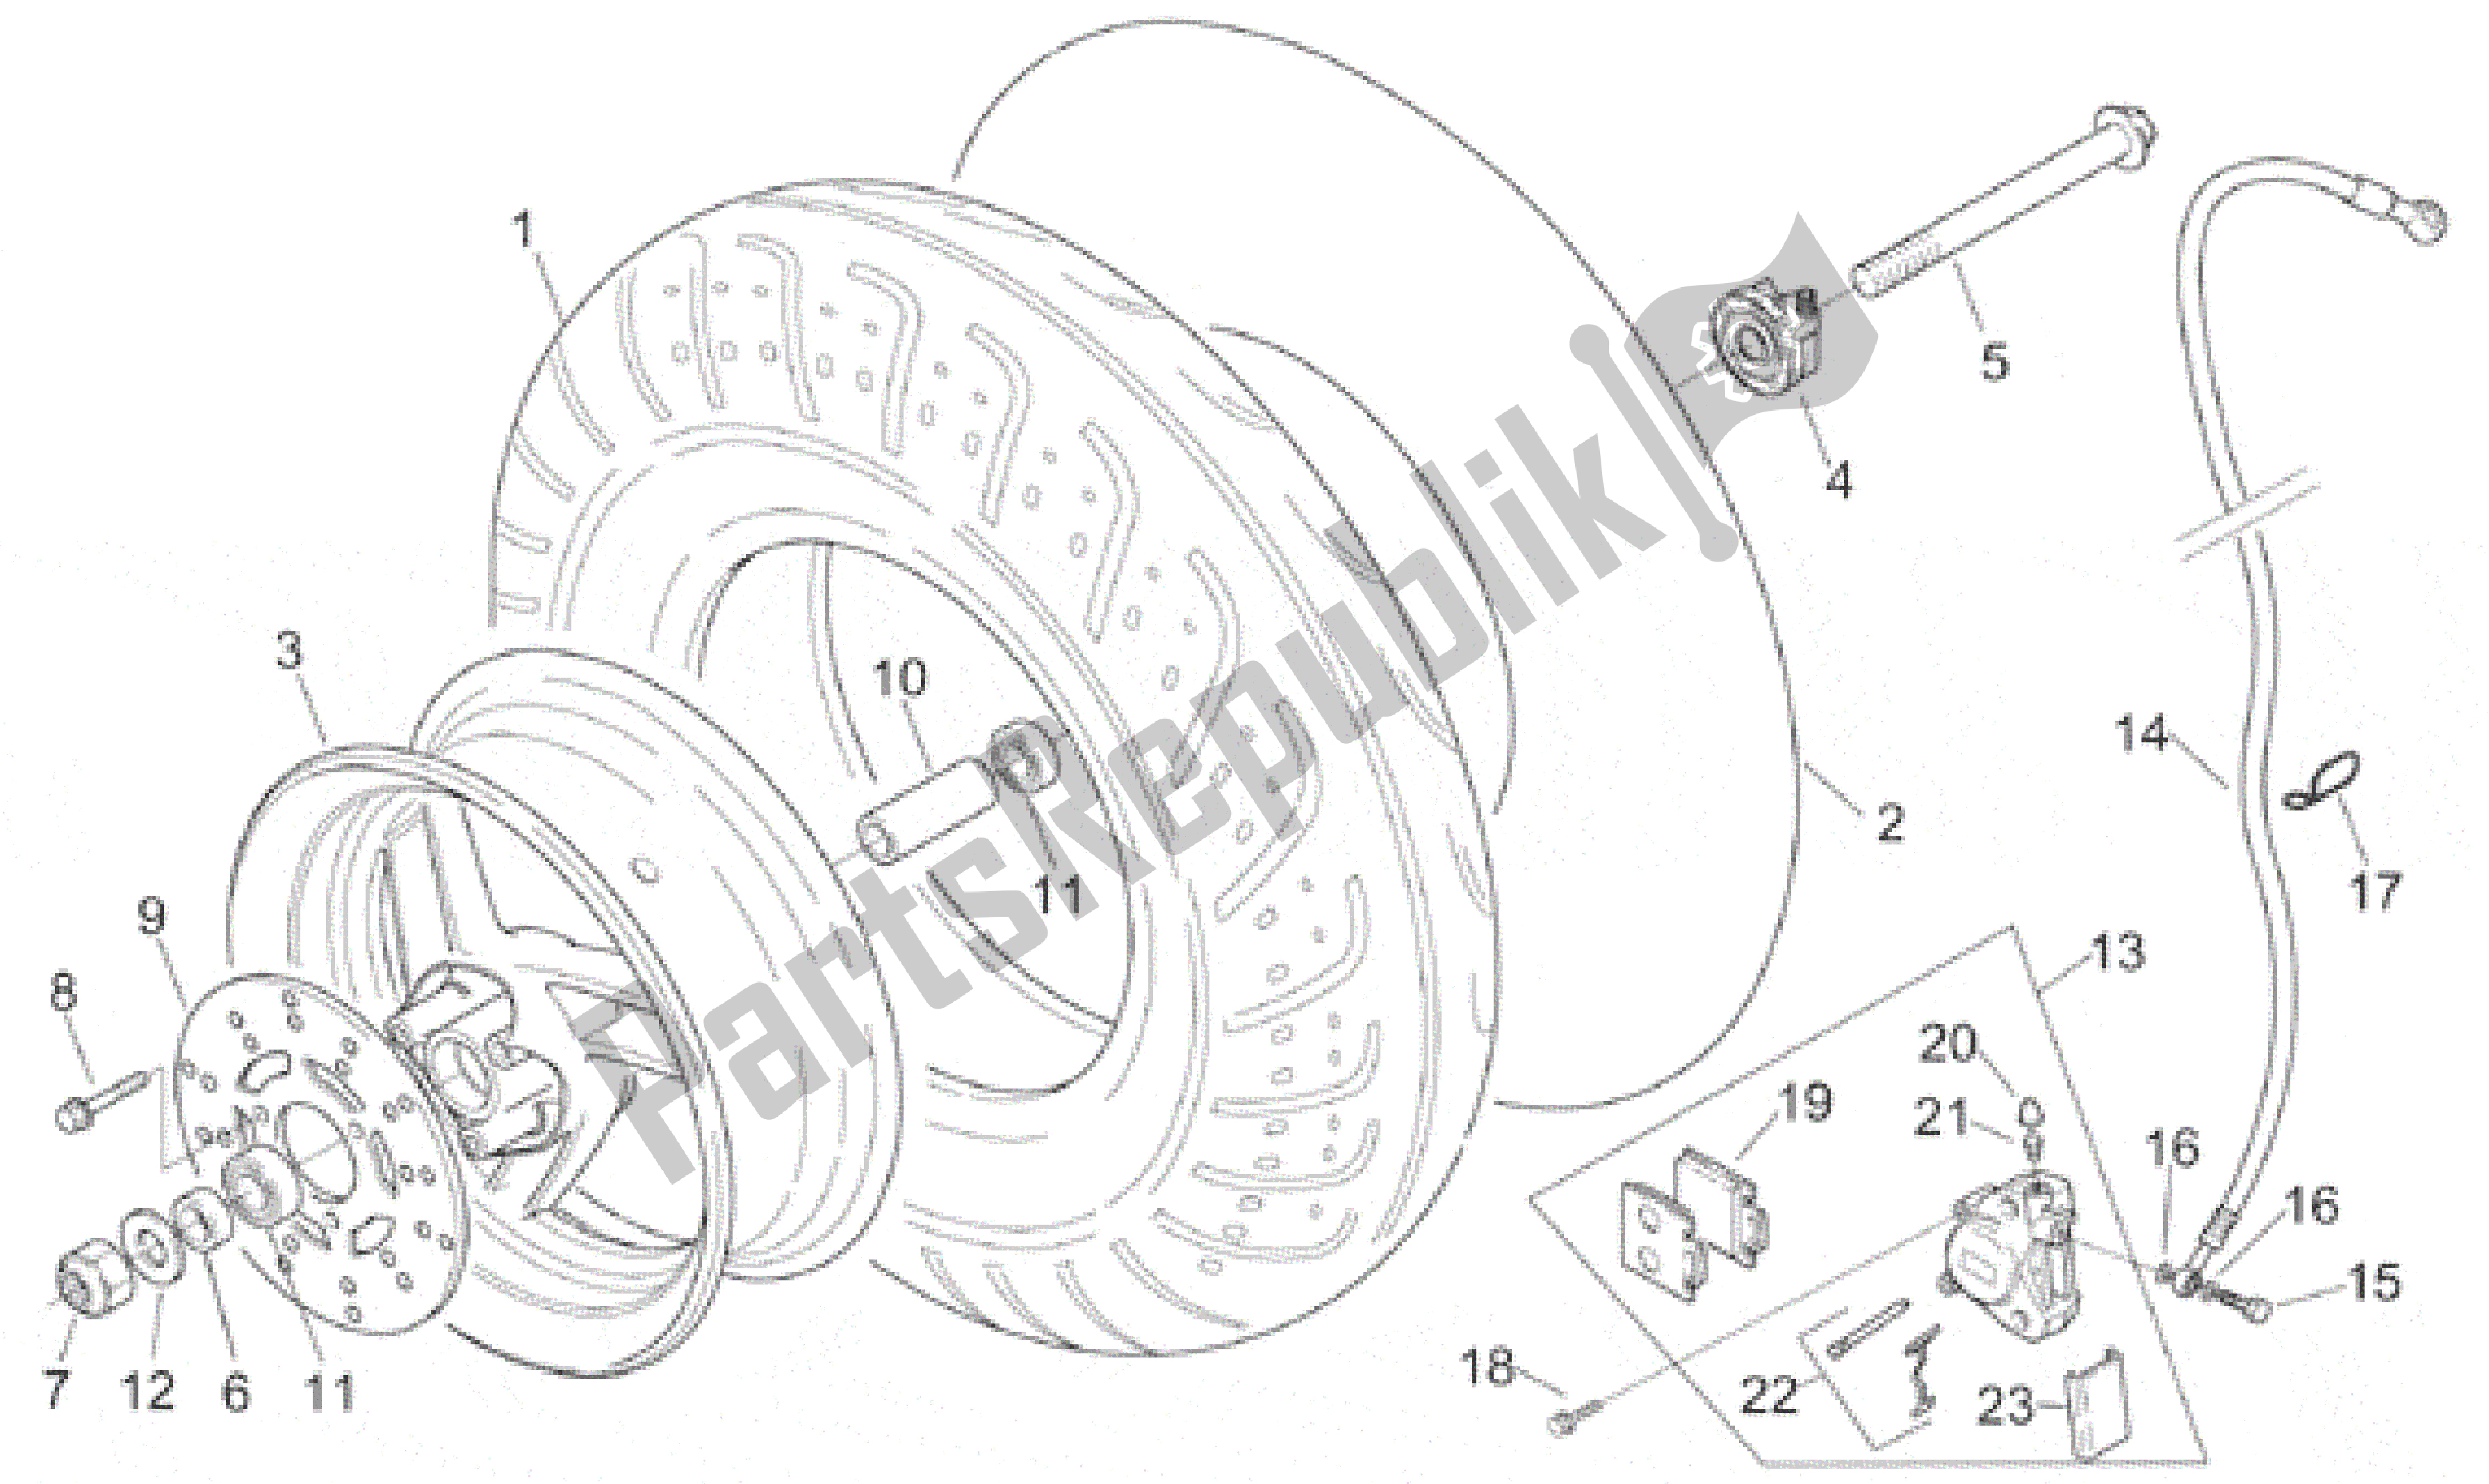 All parts for the Front Wheel of the Aprilia Sonic 50 1998 - 2001